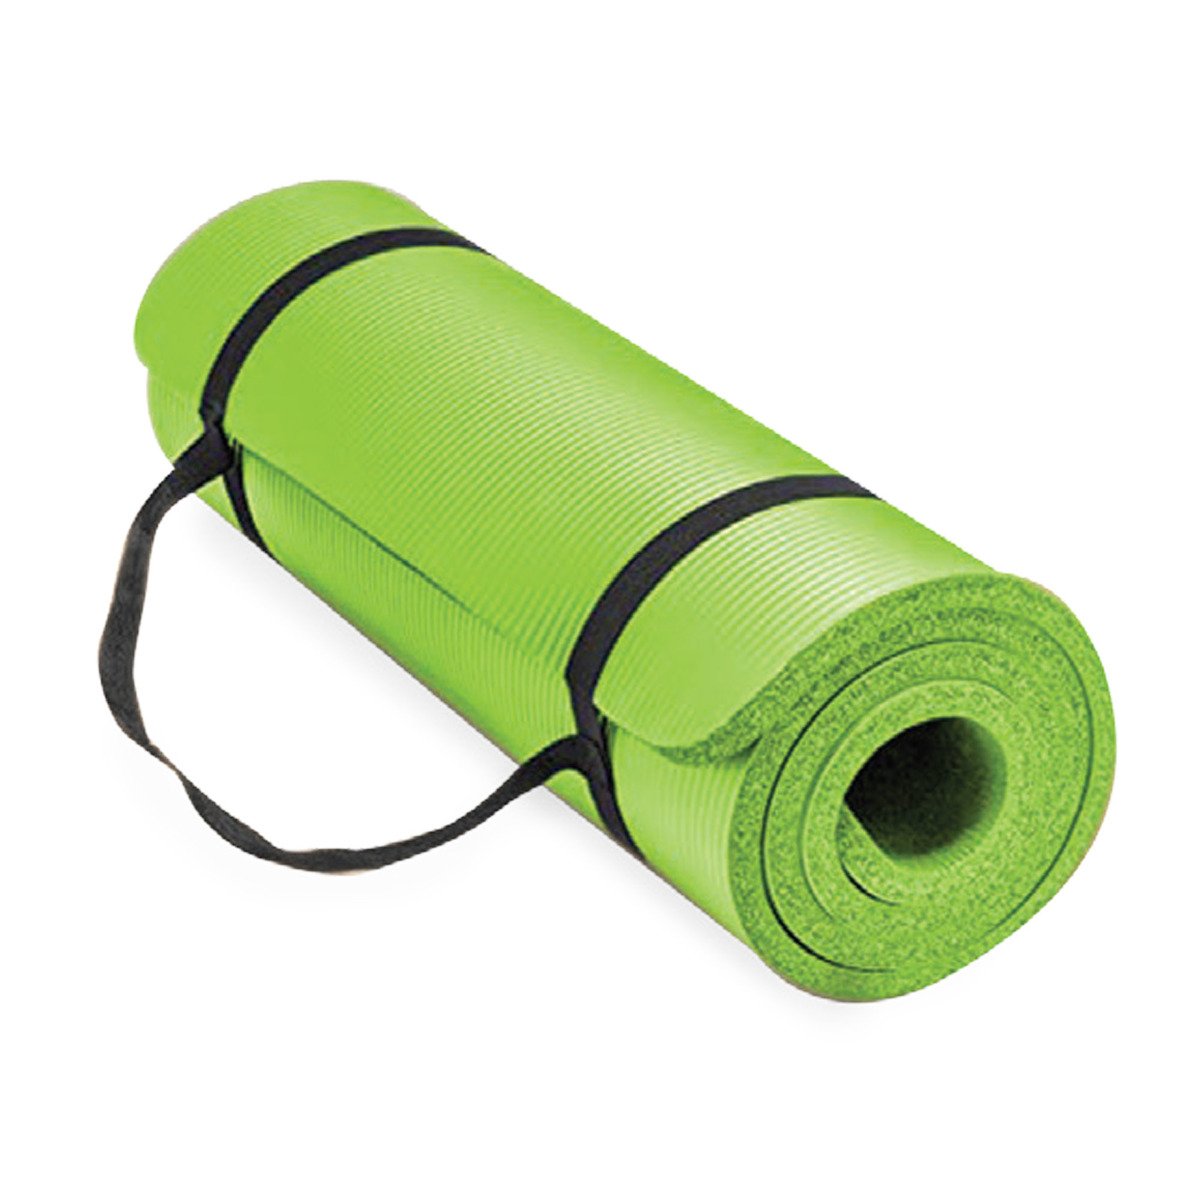 Sports Champion Yoga Mat 10mm 24301 Assorted Color